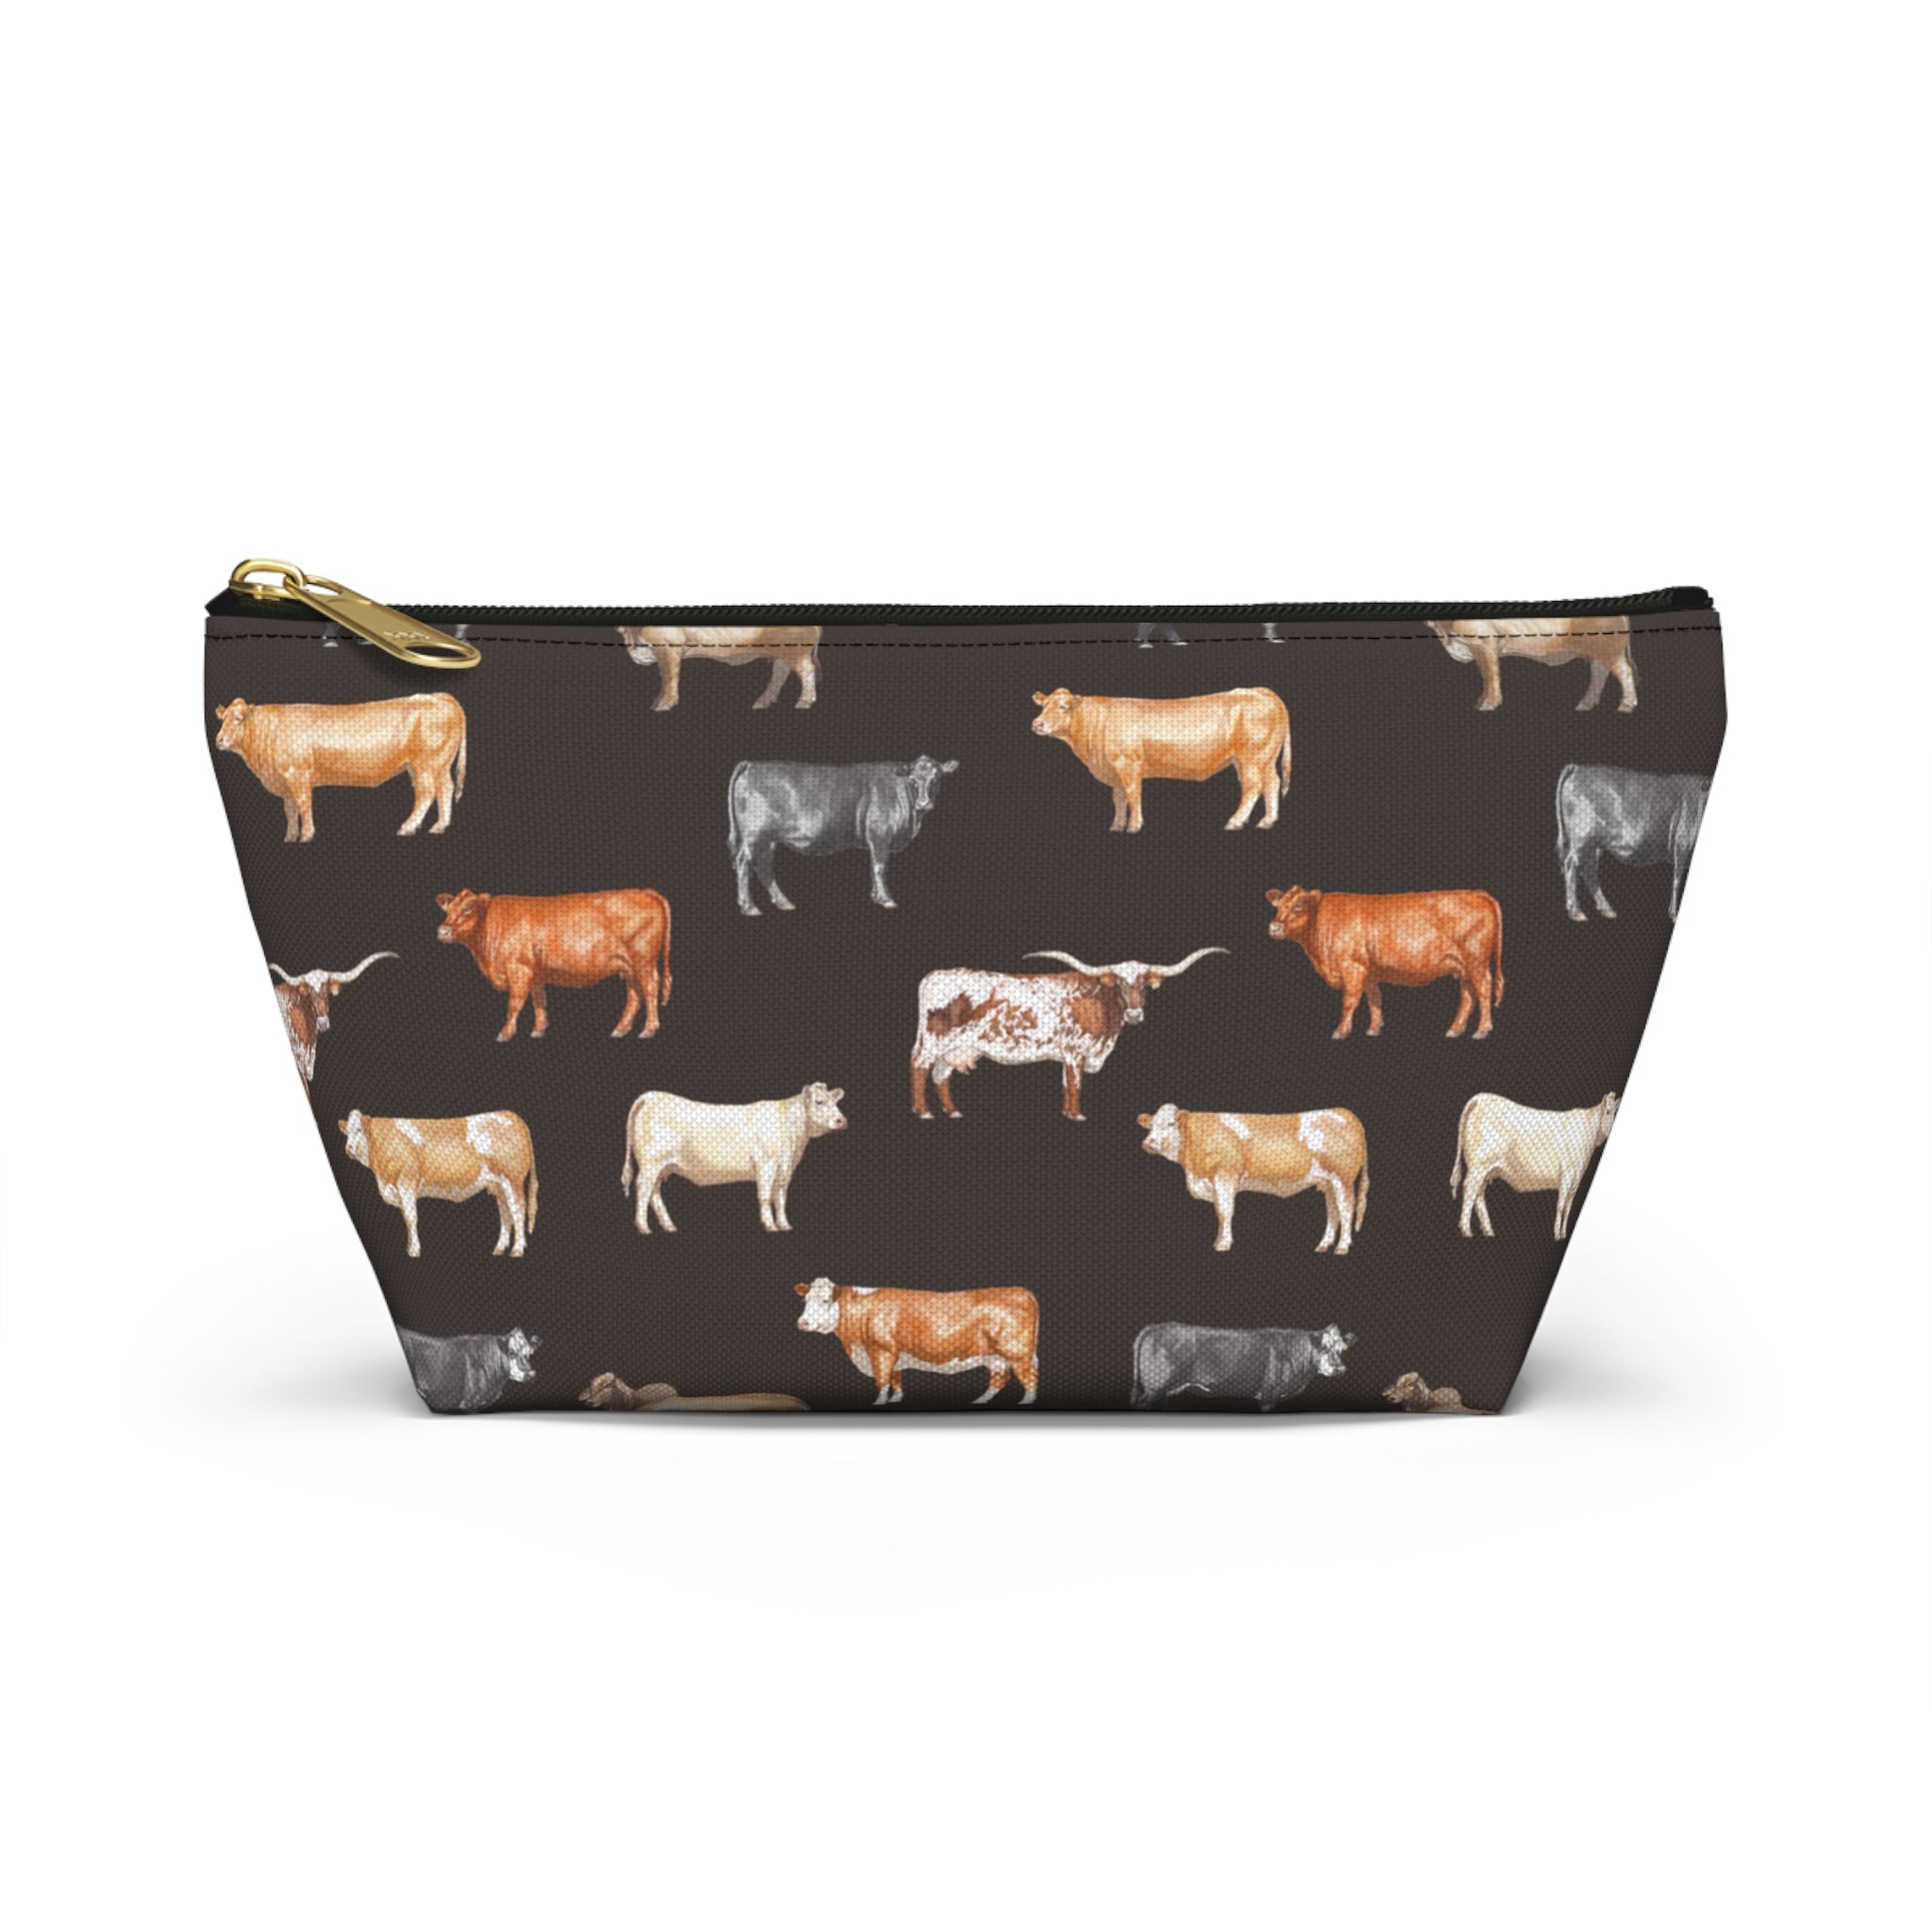 Beef Cows Pencil Pouch in Black